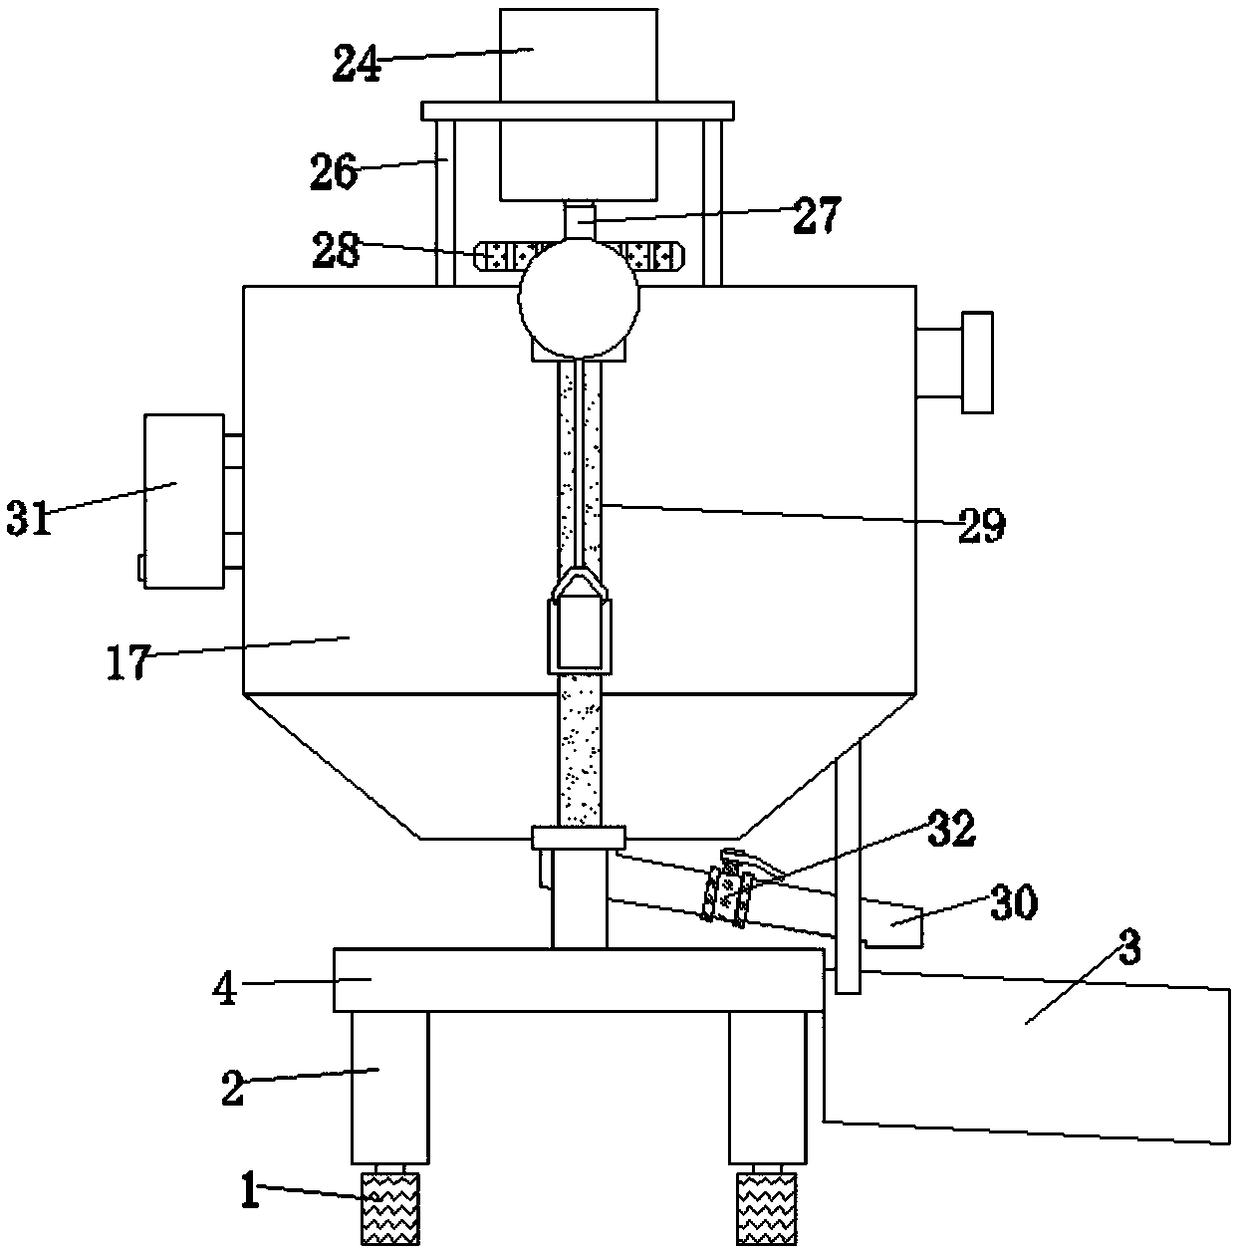 Feeding device convenient to use and used for animal husbandry